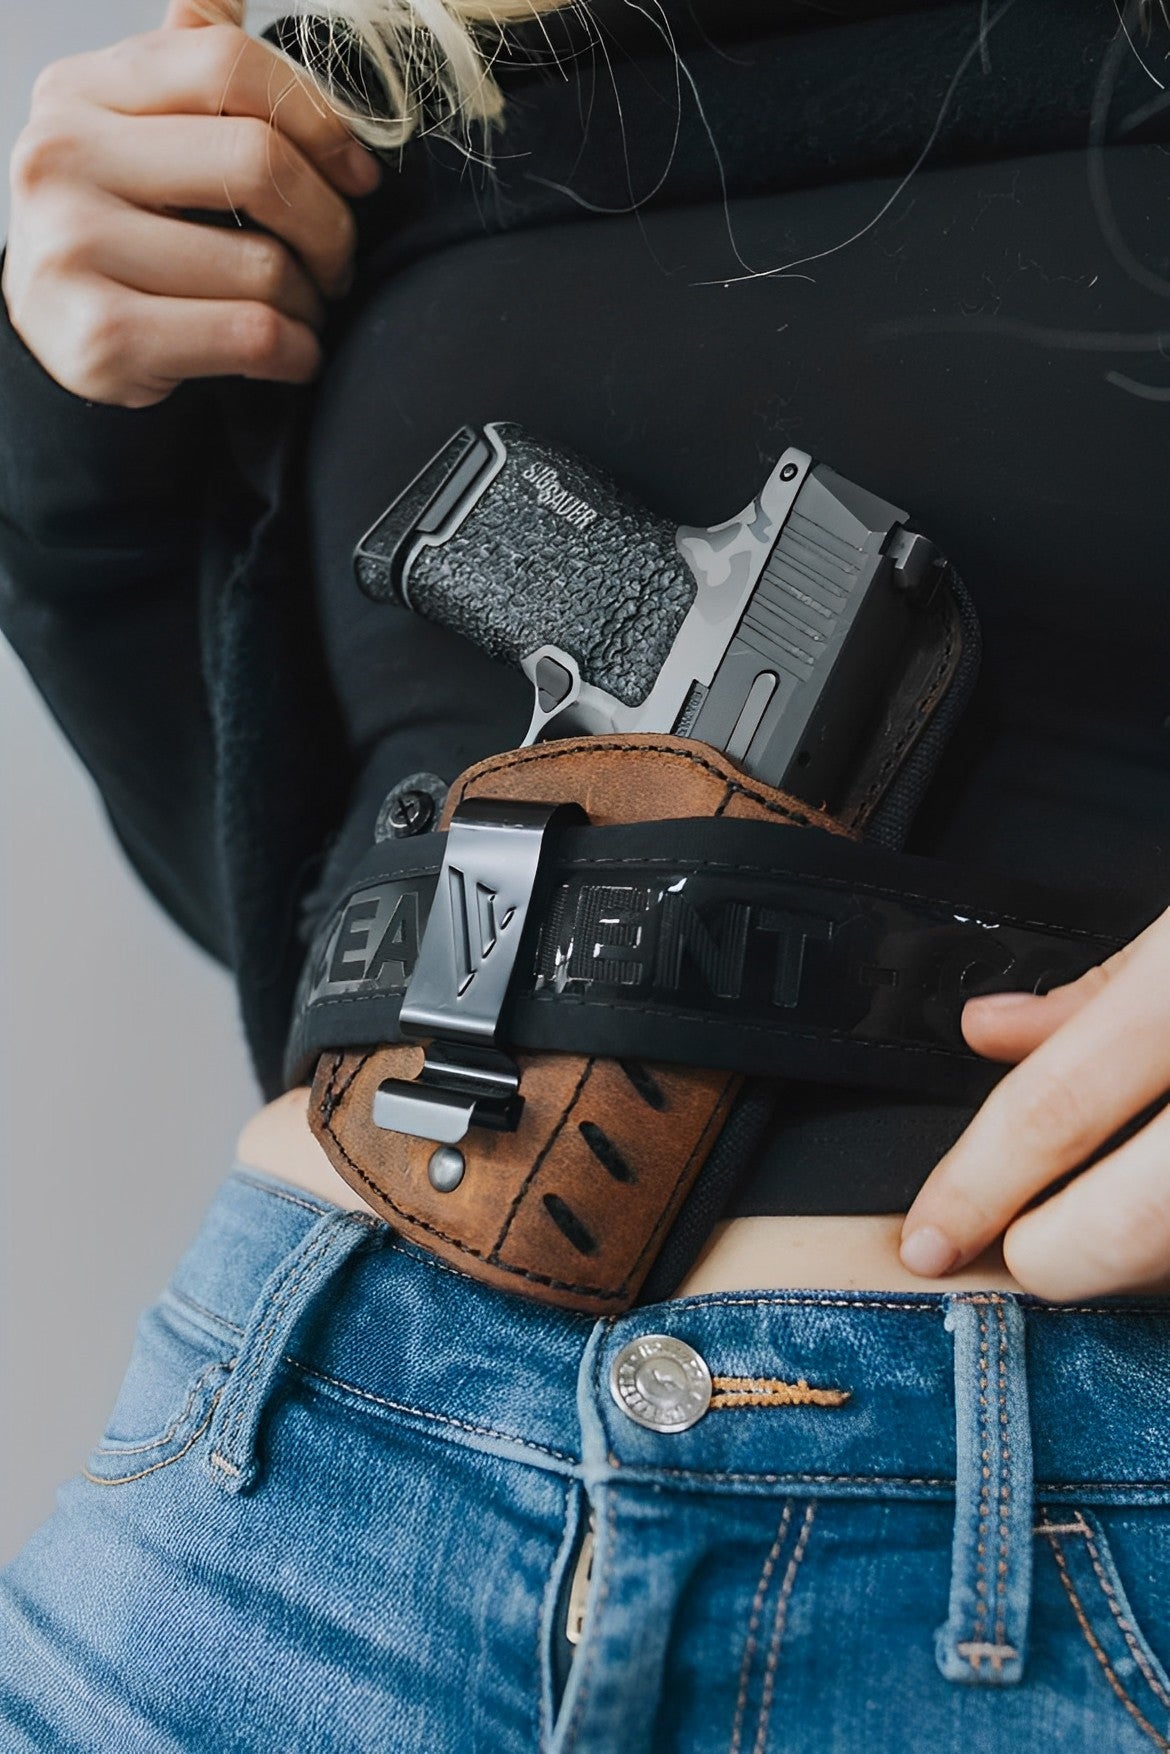 STRAPT-TAC Belly Band Holster (Kydex IWB Holster Not Included) by